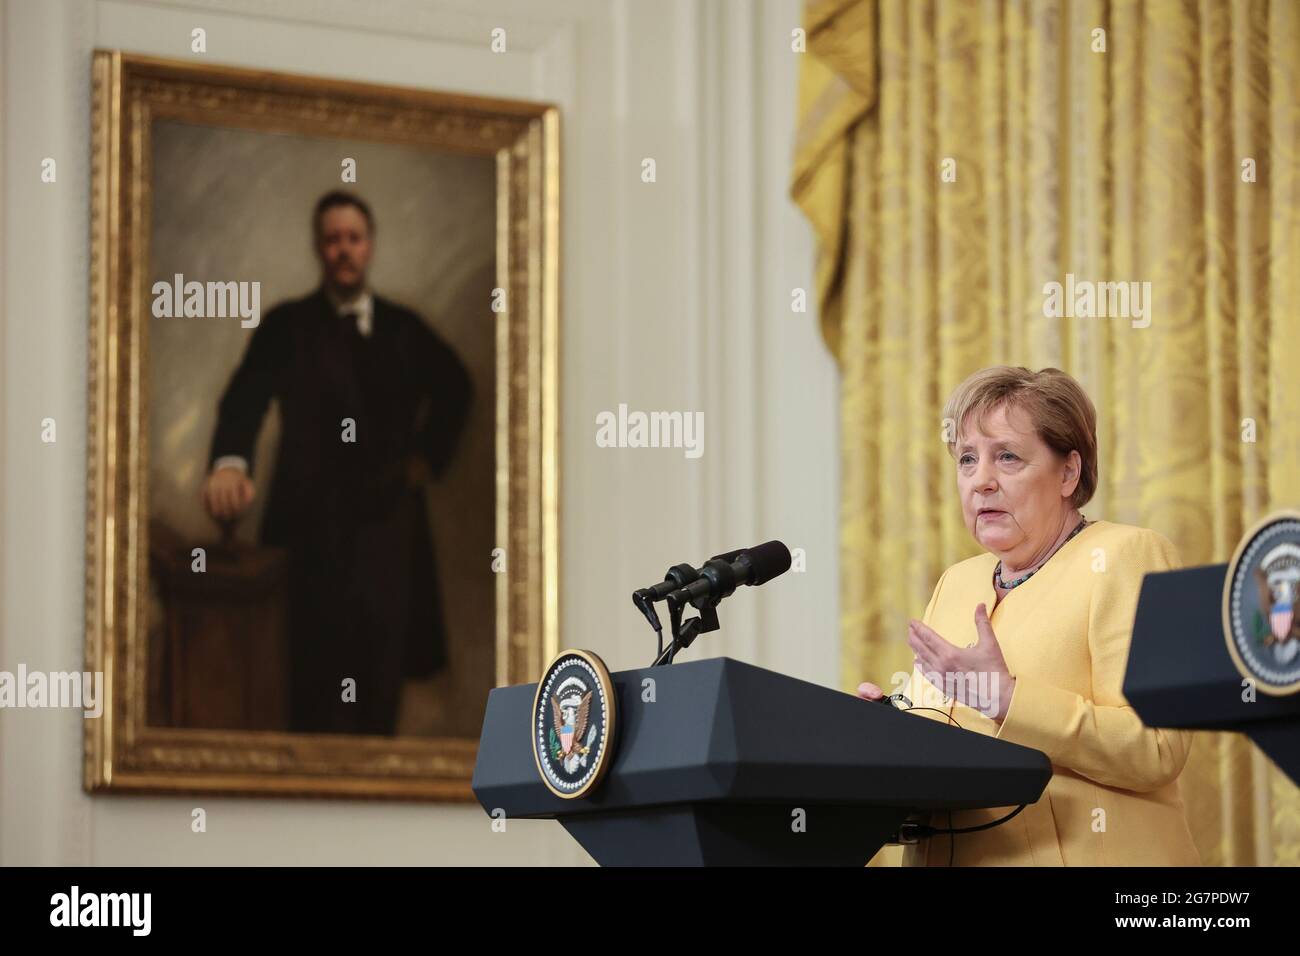 Washington, USA. 15th July, 2021. German Chancellor Angela Merkel speaks during a joint press conference with US President Joe Biden in the East Room of the White House on July 15, 202?1 in Washington, DC. (Photo by Oliver Contreras/SIPA USA) Credit: Sipa USA/Alamy Live News Stock Photo